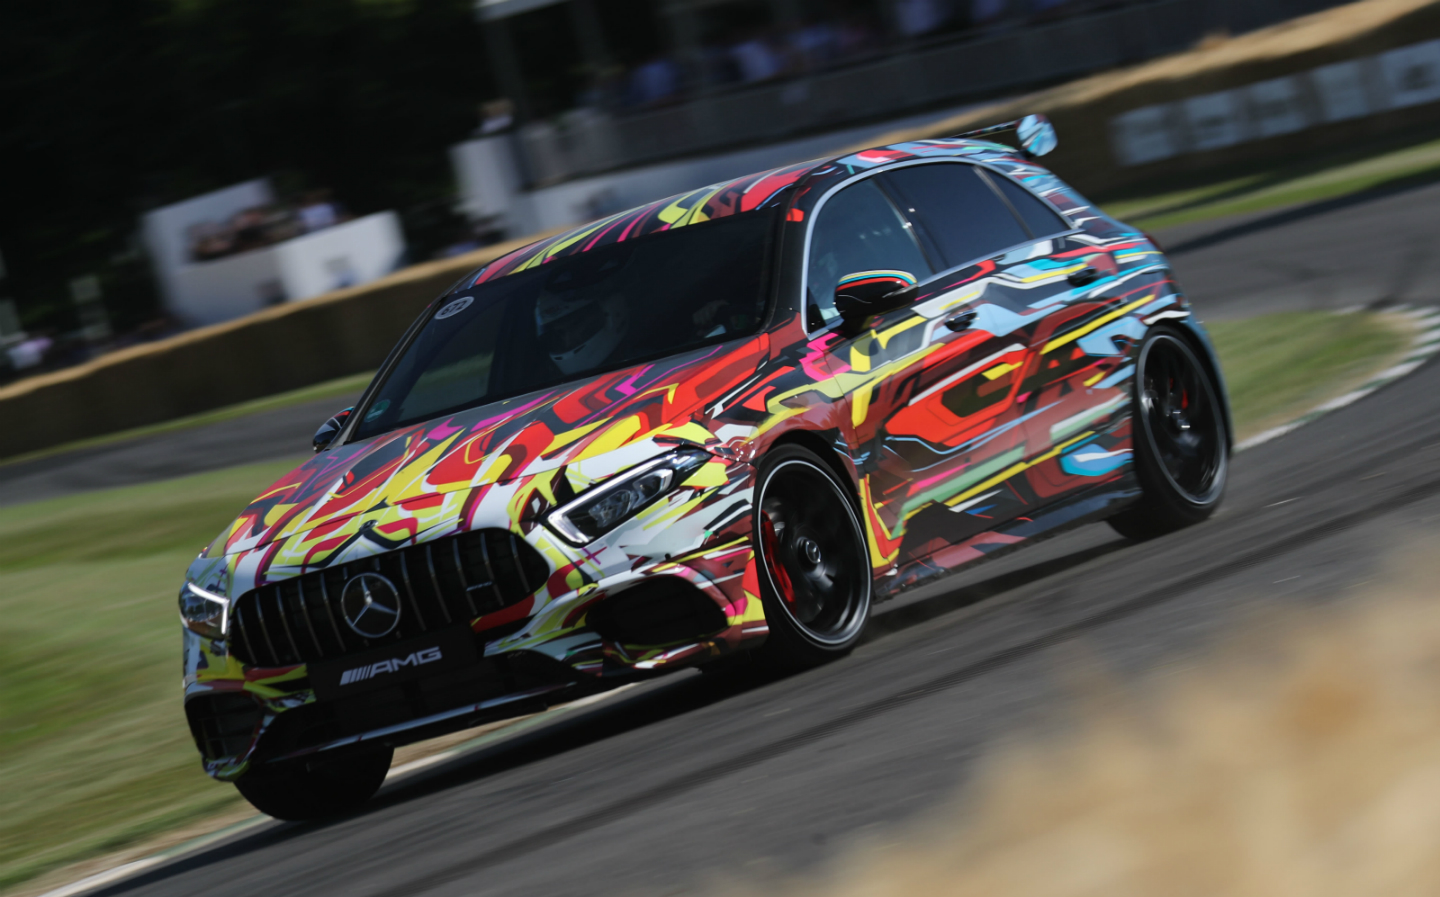 The best new cars at the 2019 Goodwood Festival of Speed